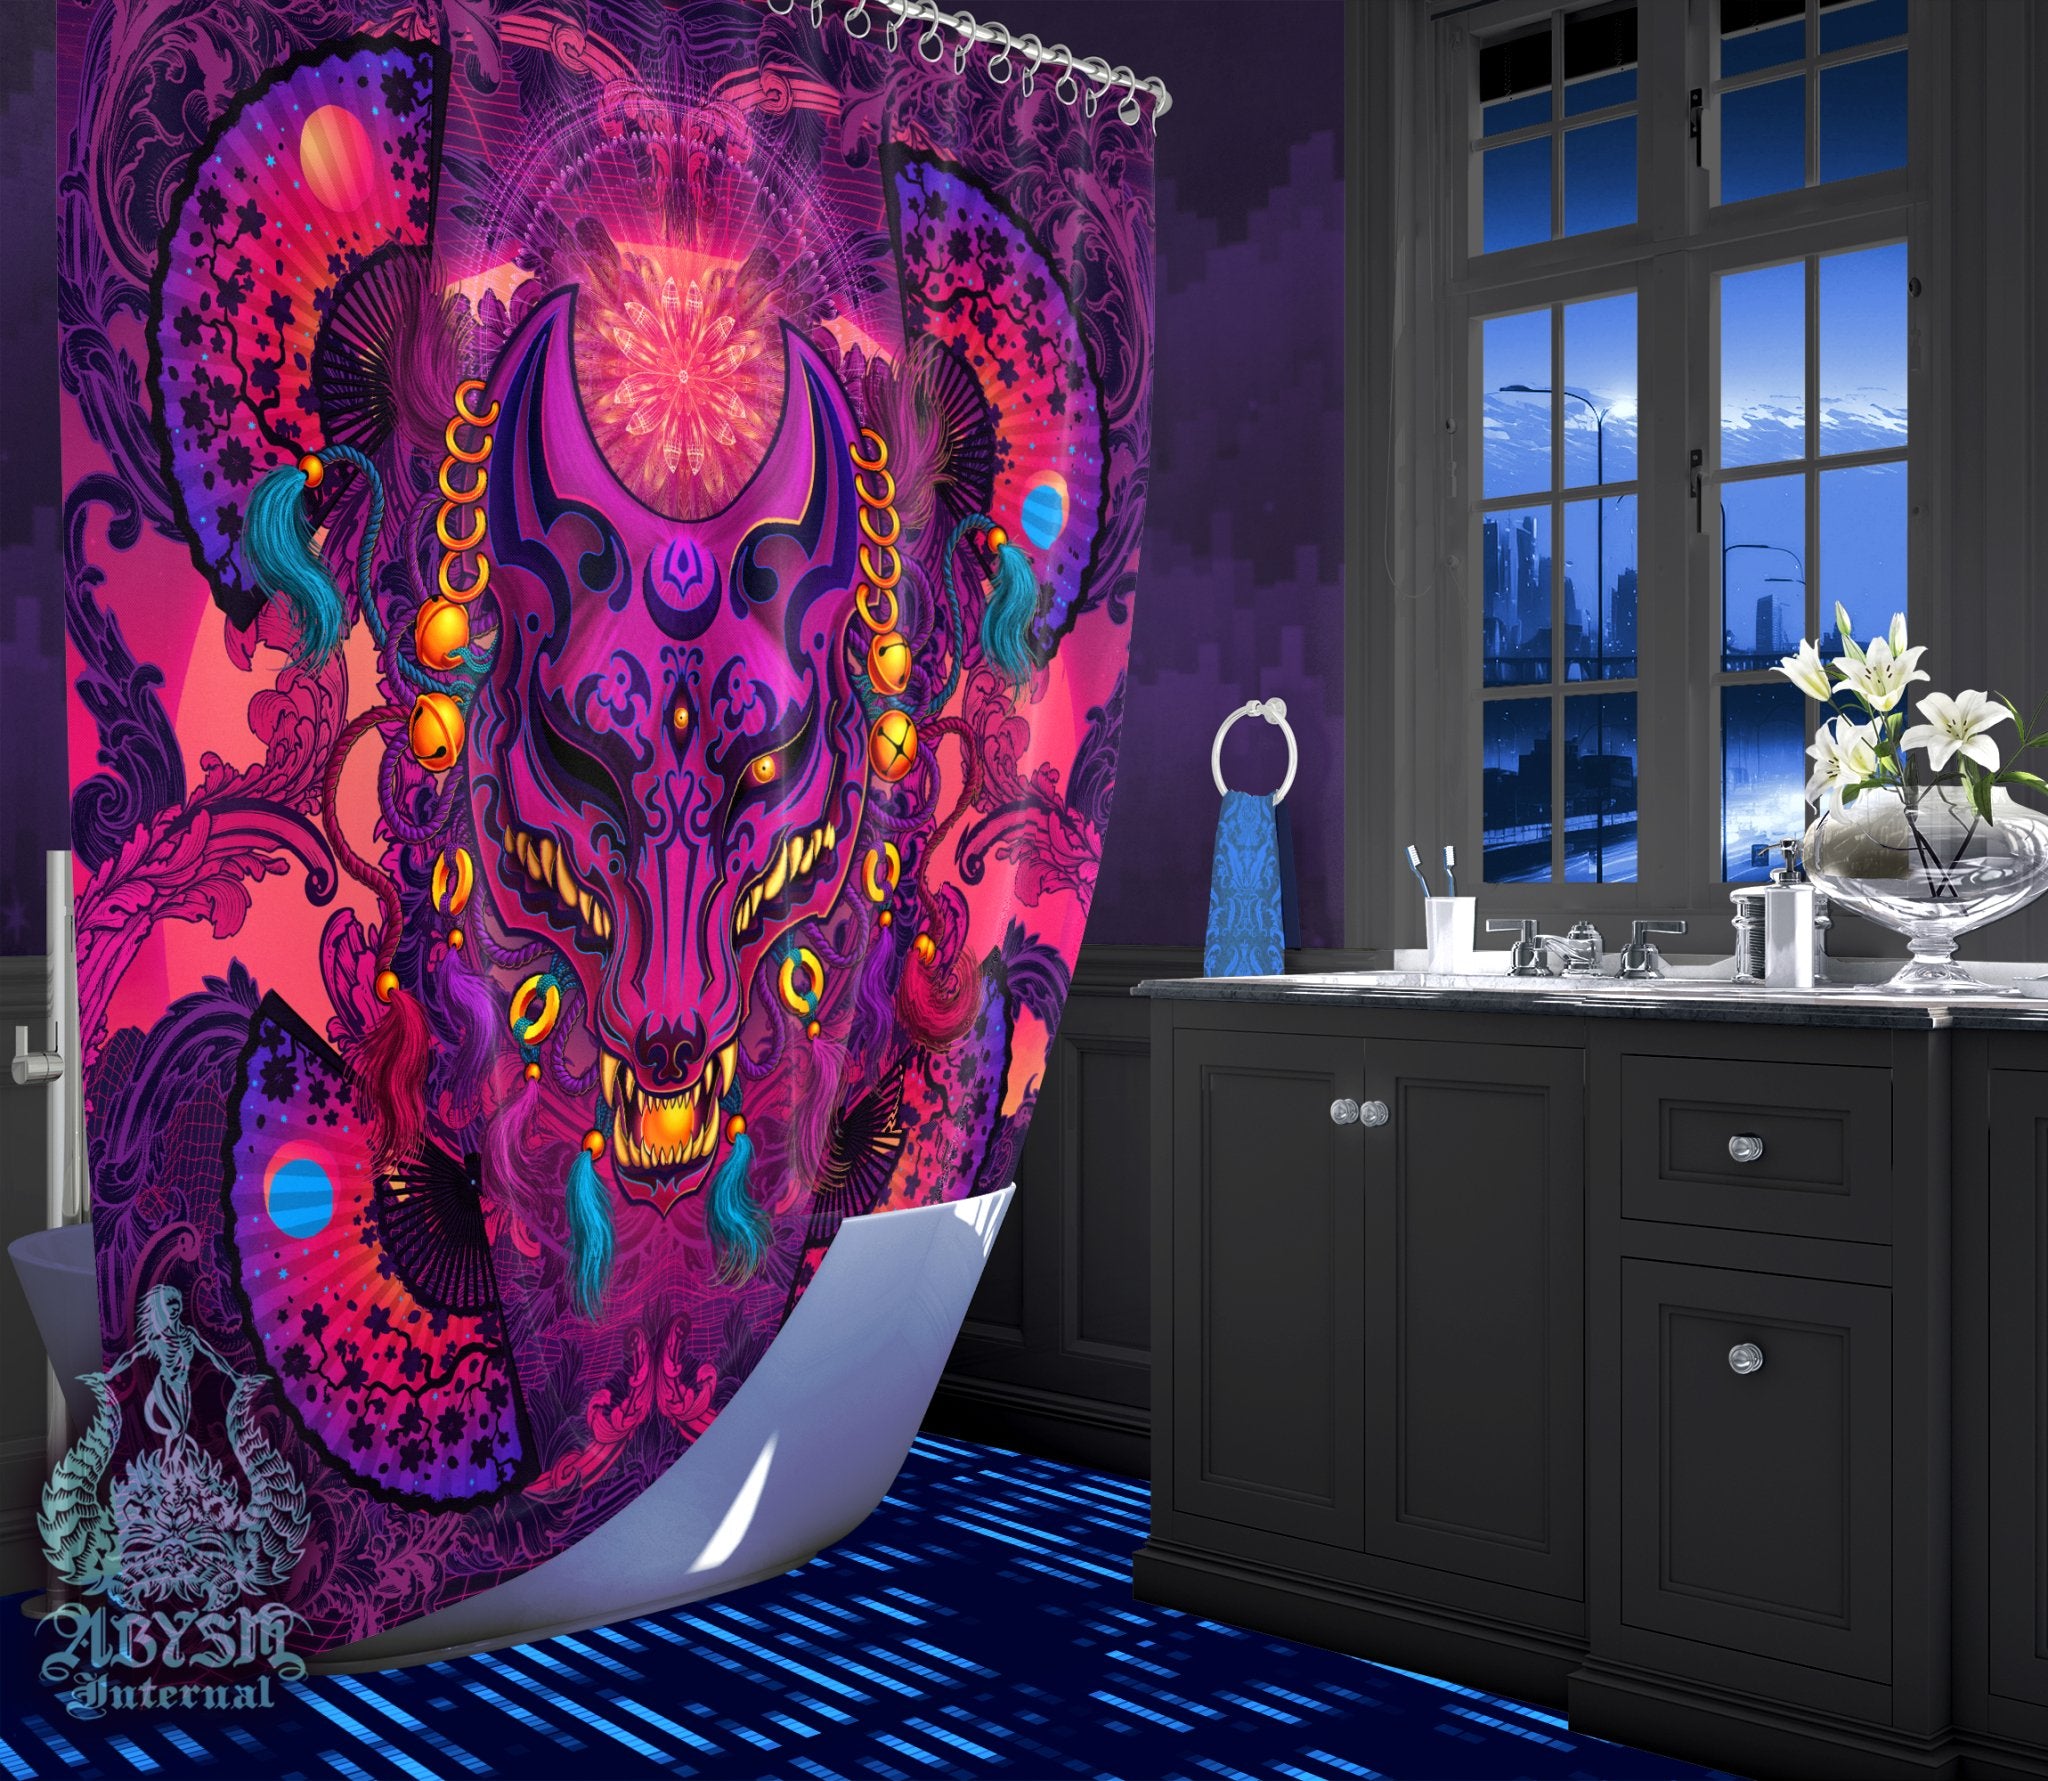 Japanese Vaporwave Shower Curtain, 71x74 inches, Synthwave Bathroom Decor, Psychedelic and Retrowave Home Art, 80s Anime - Kitsune - Abysm Internal